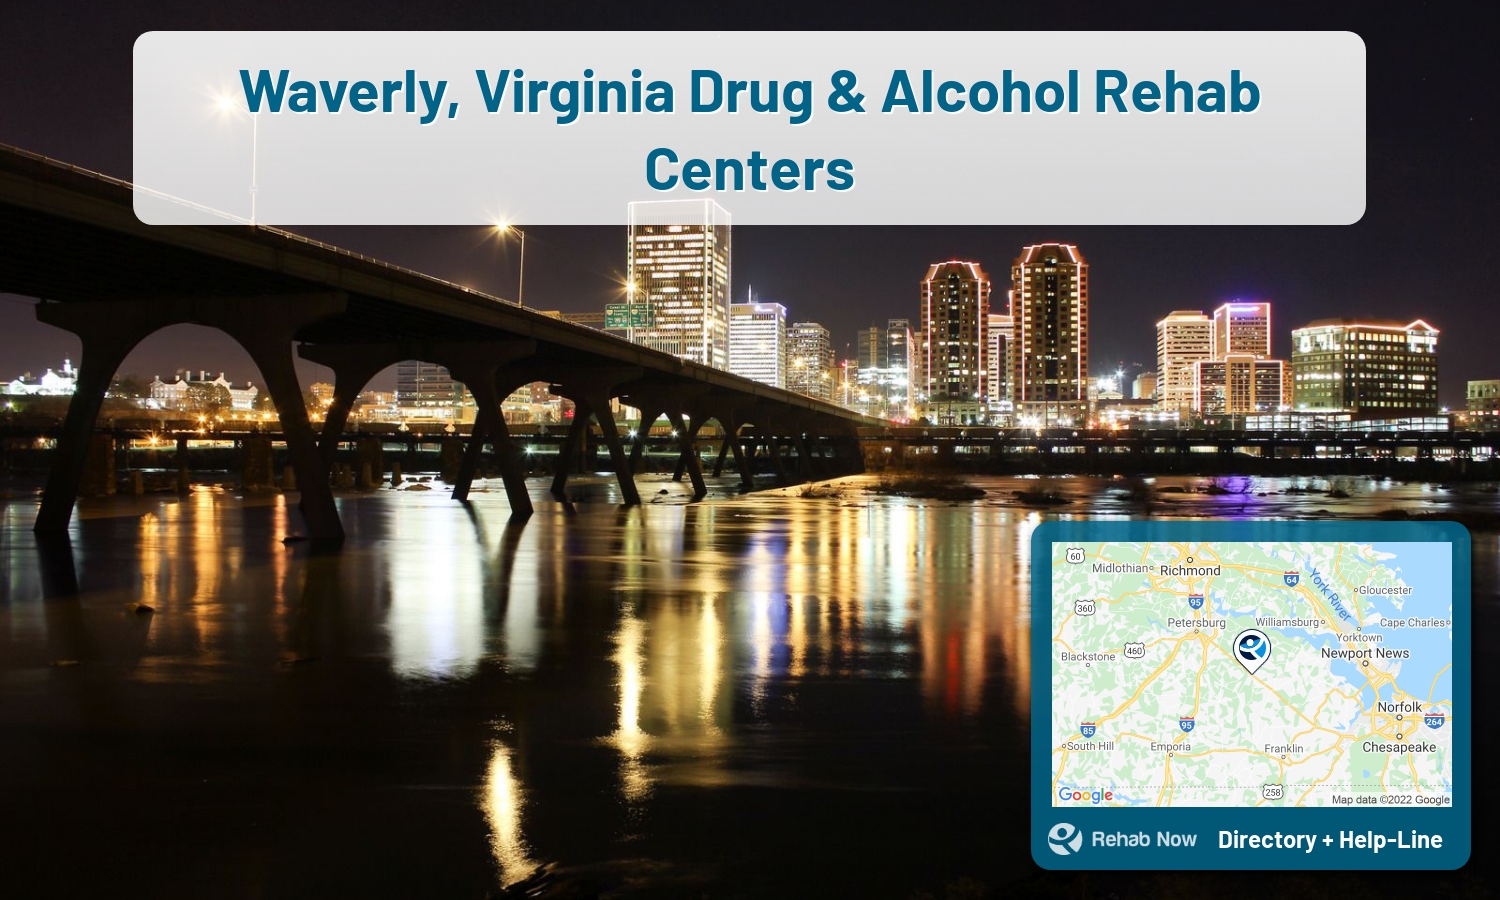 Waverly, VA Treatment Centers. Find drug rehab in Waverly, Virginia, or detox and treatment programs. Get the right help now!